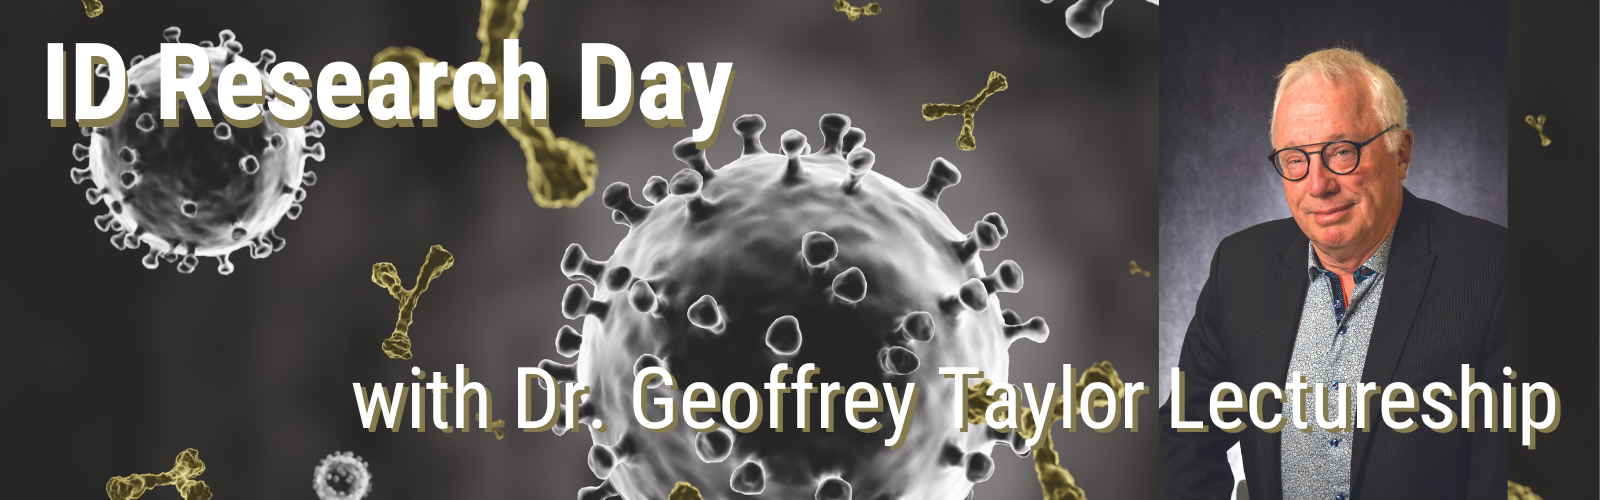 ID Research Day with Dr. Geoffrey Taylor Lectureship